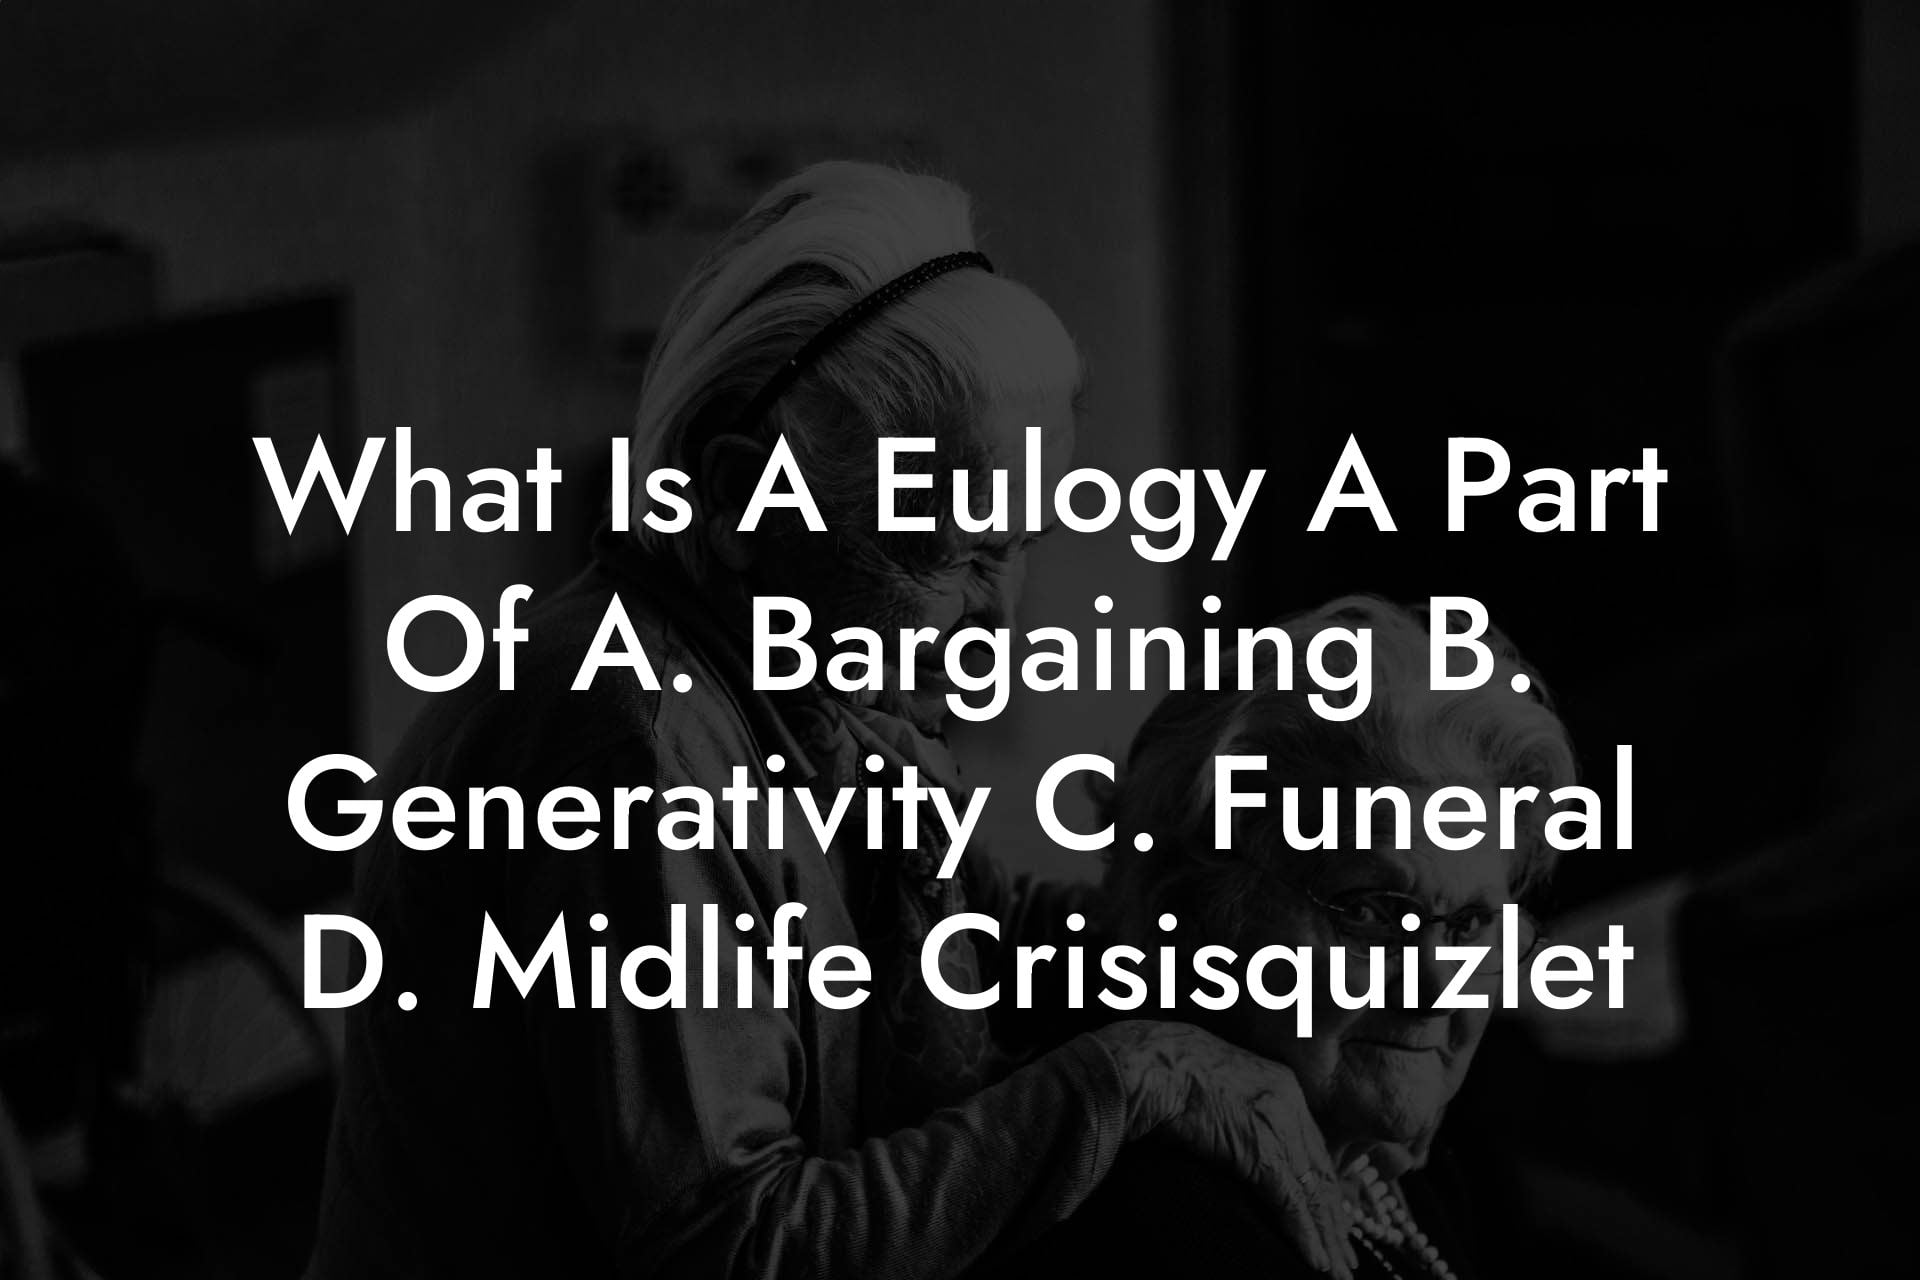 What Is A Eulogy A Part Of A. Bargaining B. Generativity C. Funeral D. Midlife Crisisquizlet